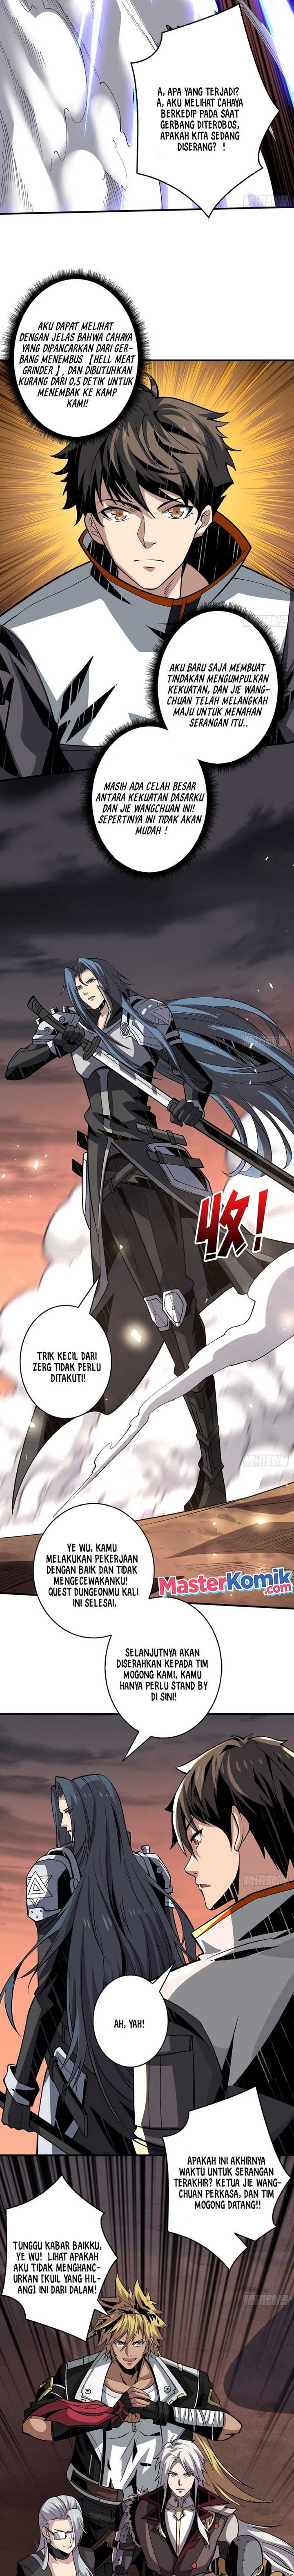 King Account At The Start Chapter 144